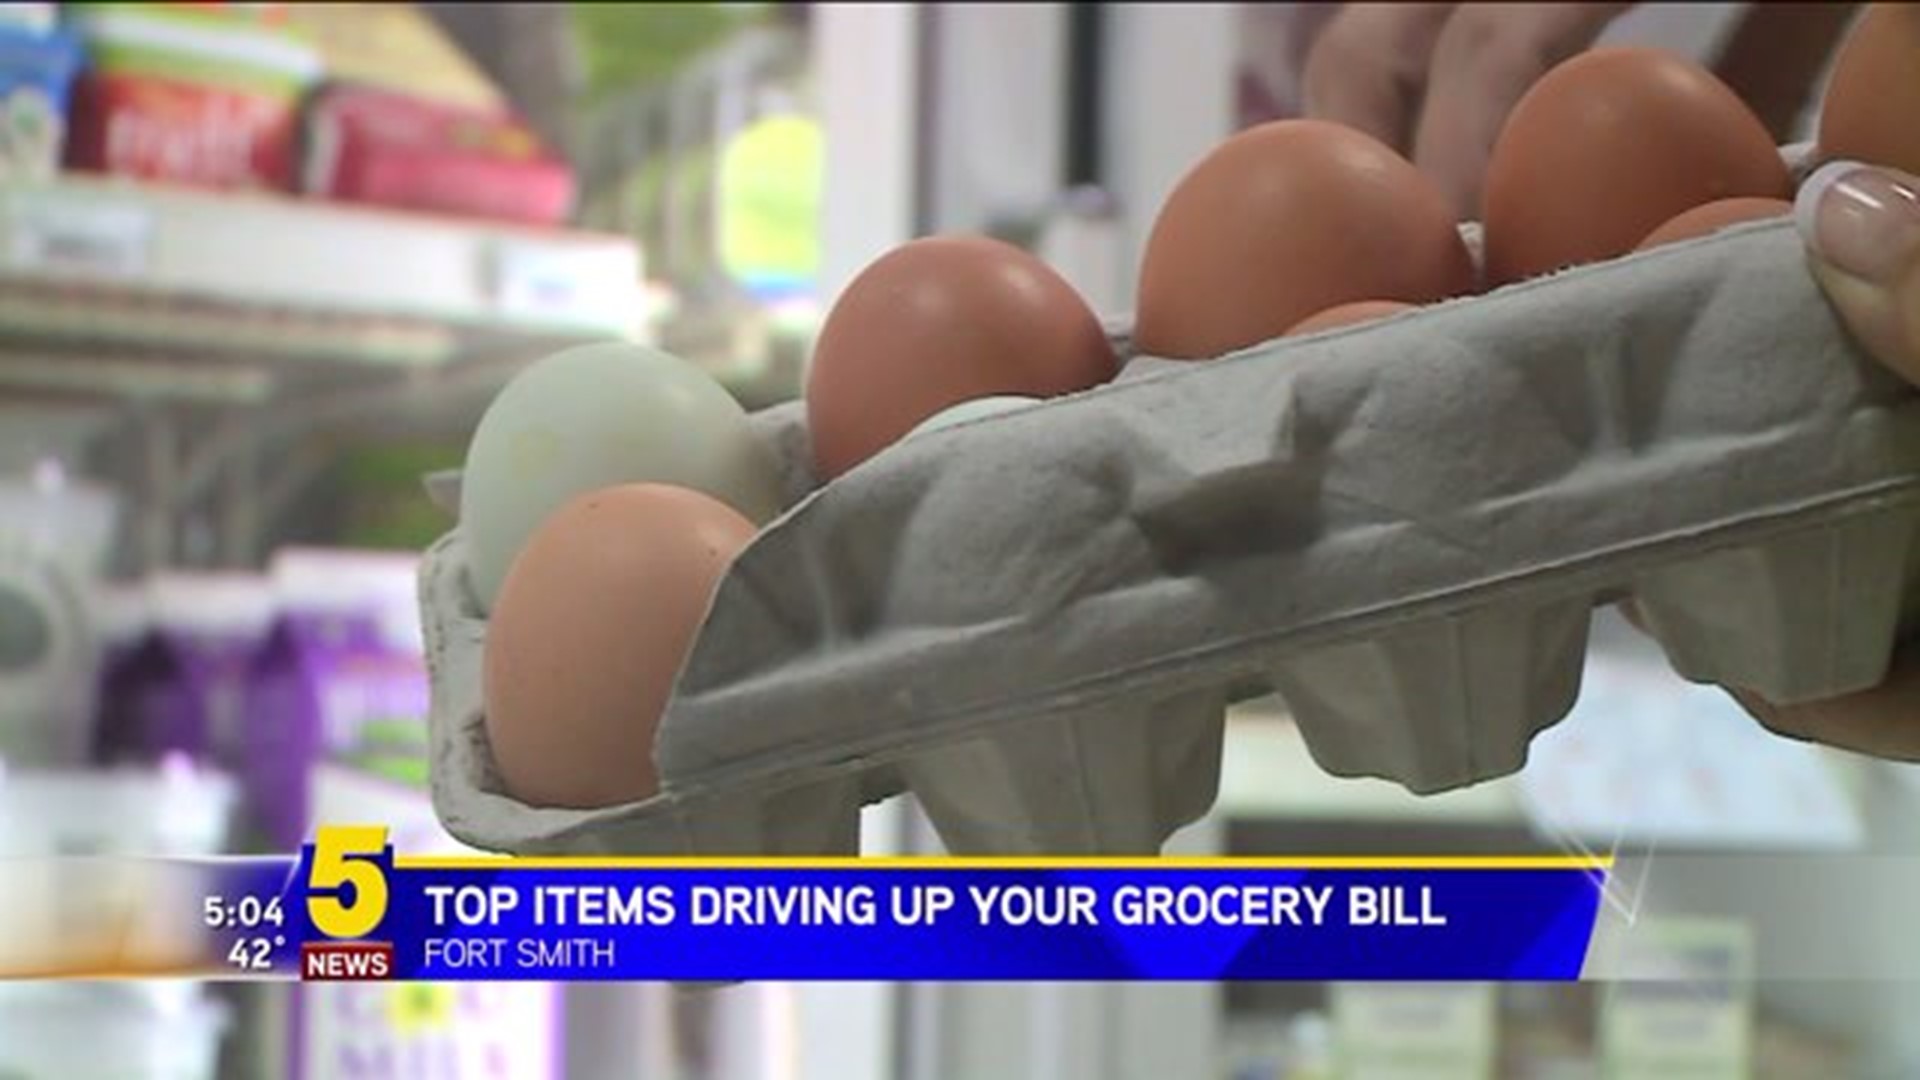 Top Items Driving Up Your Grocery Bill